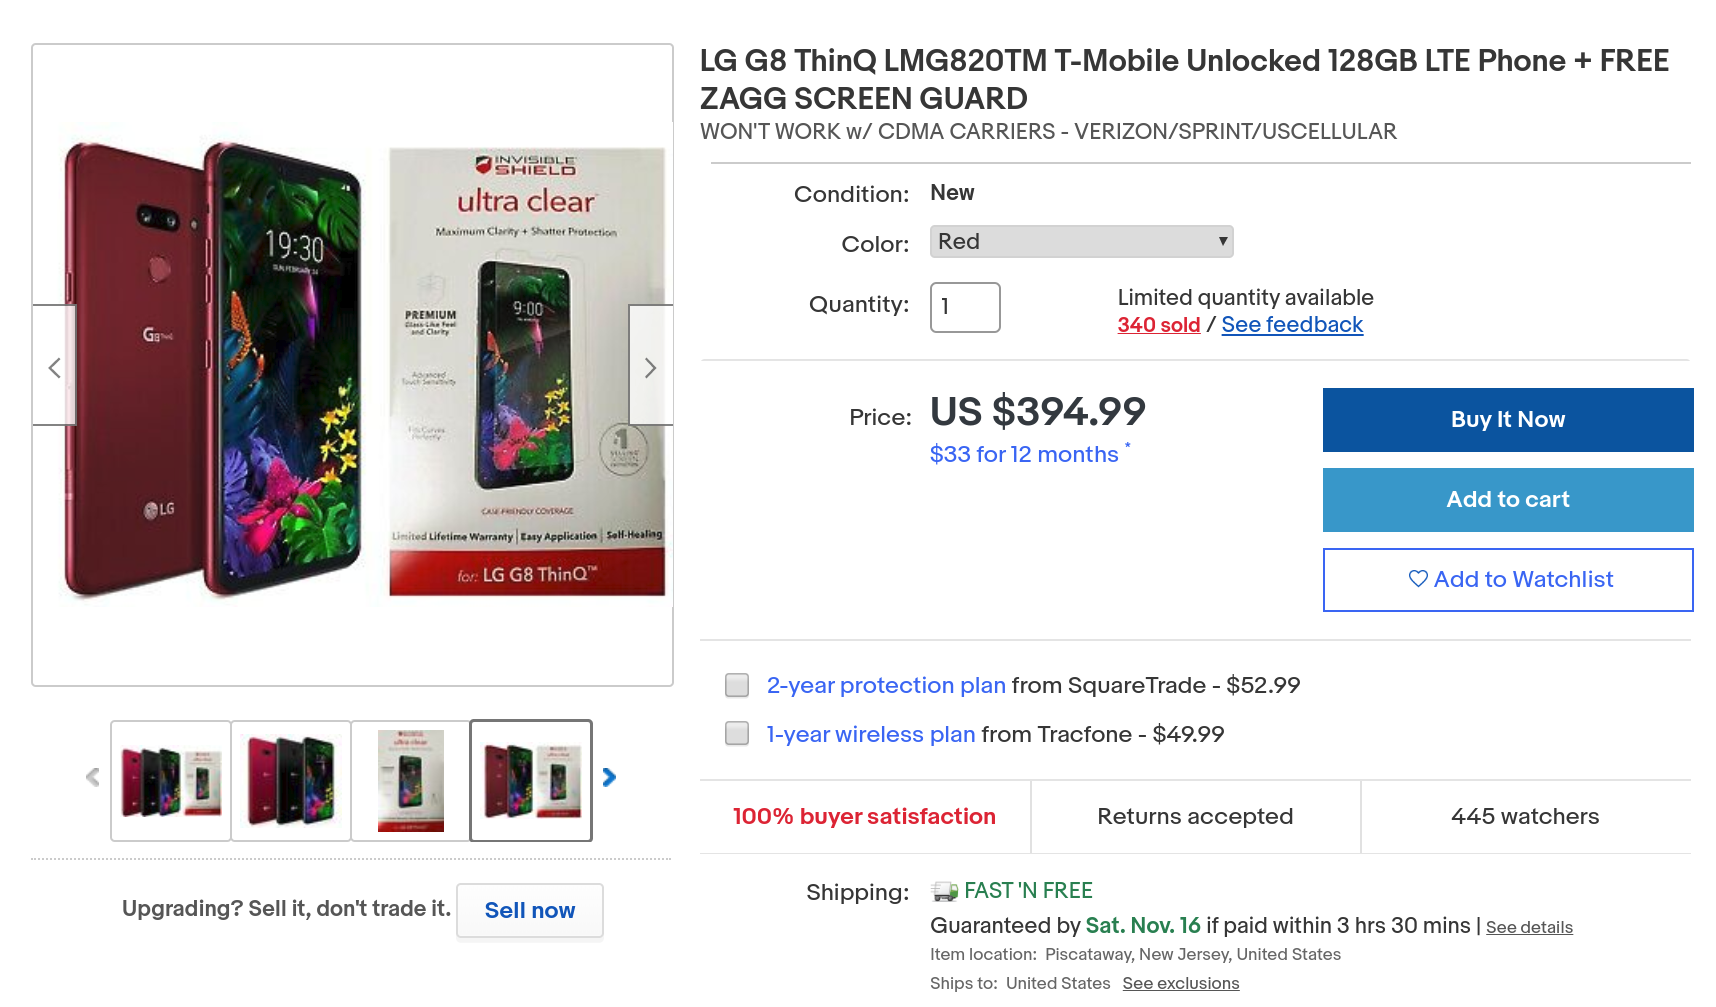 Pick up an unlocked LG G8 for just $400 with this deal from eBay (plus a free screen protector)